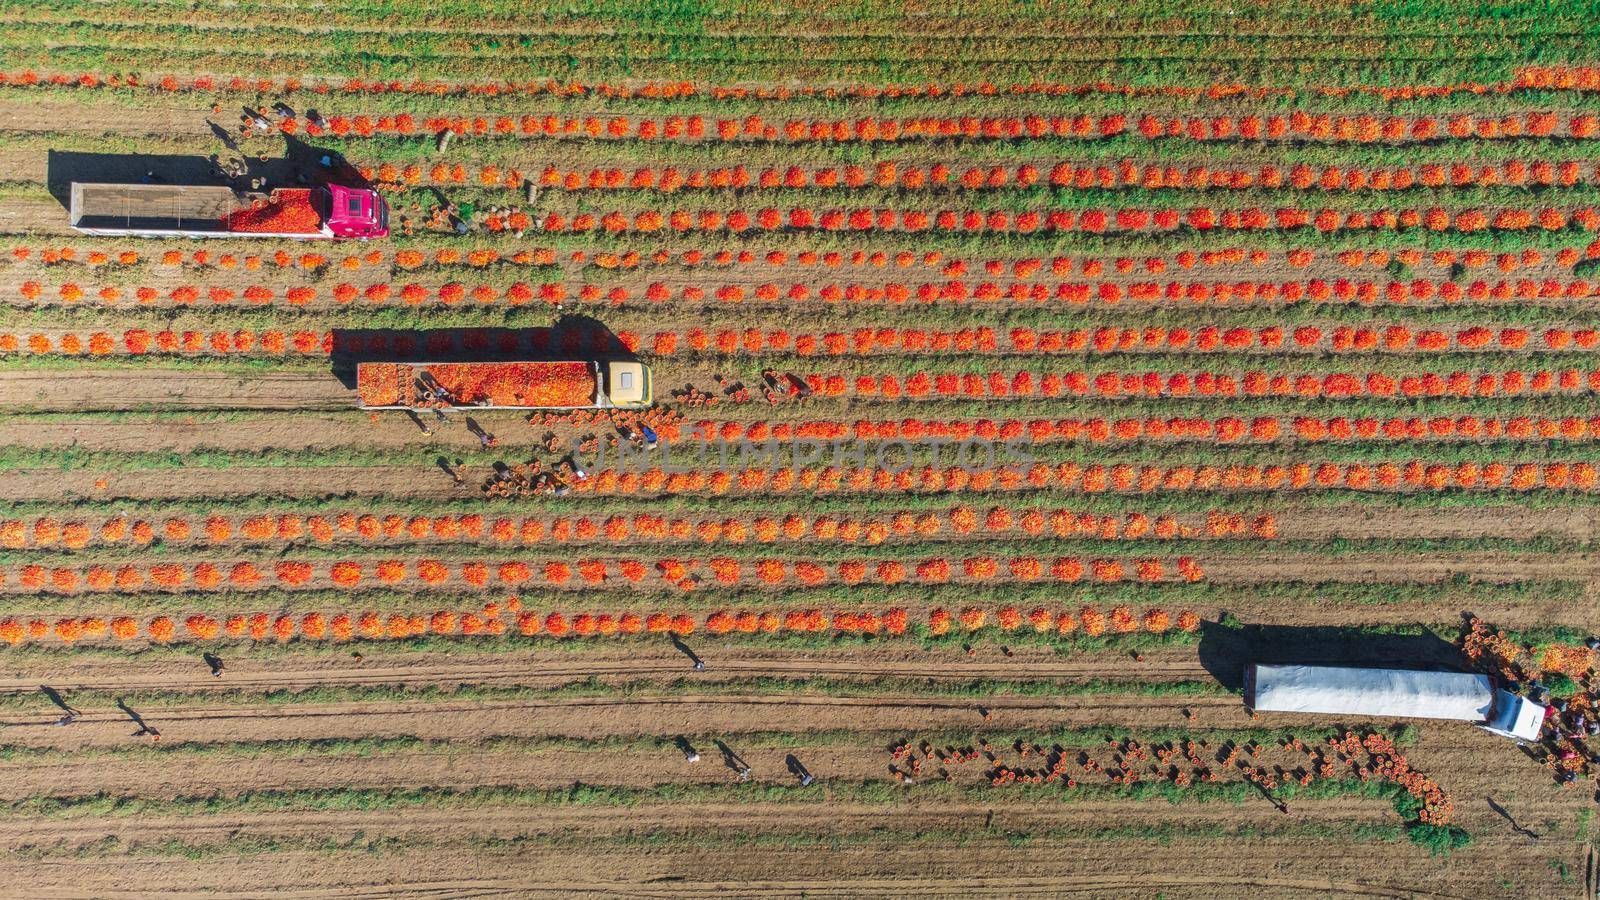 Aerial image of trucks loaded with Fresh harvested ripe Red Tomatoes. High quality photo